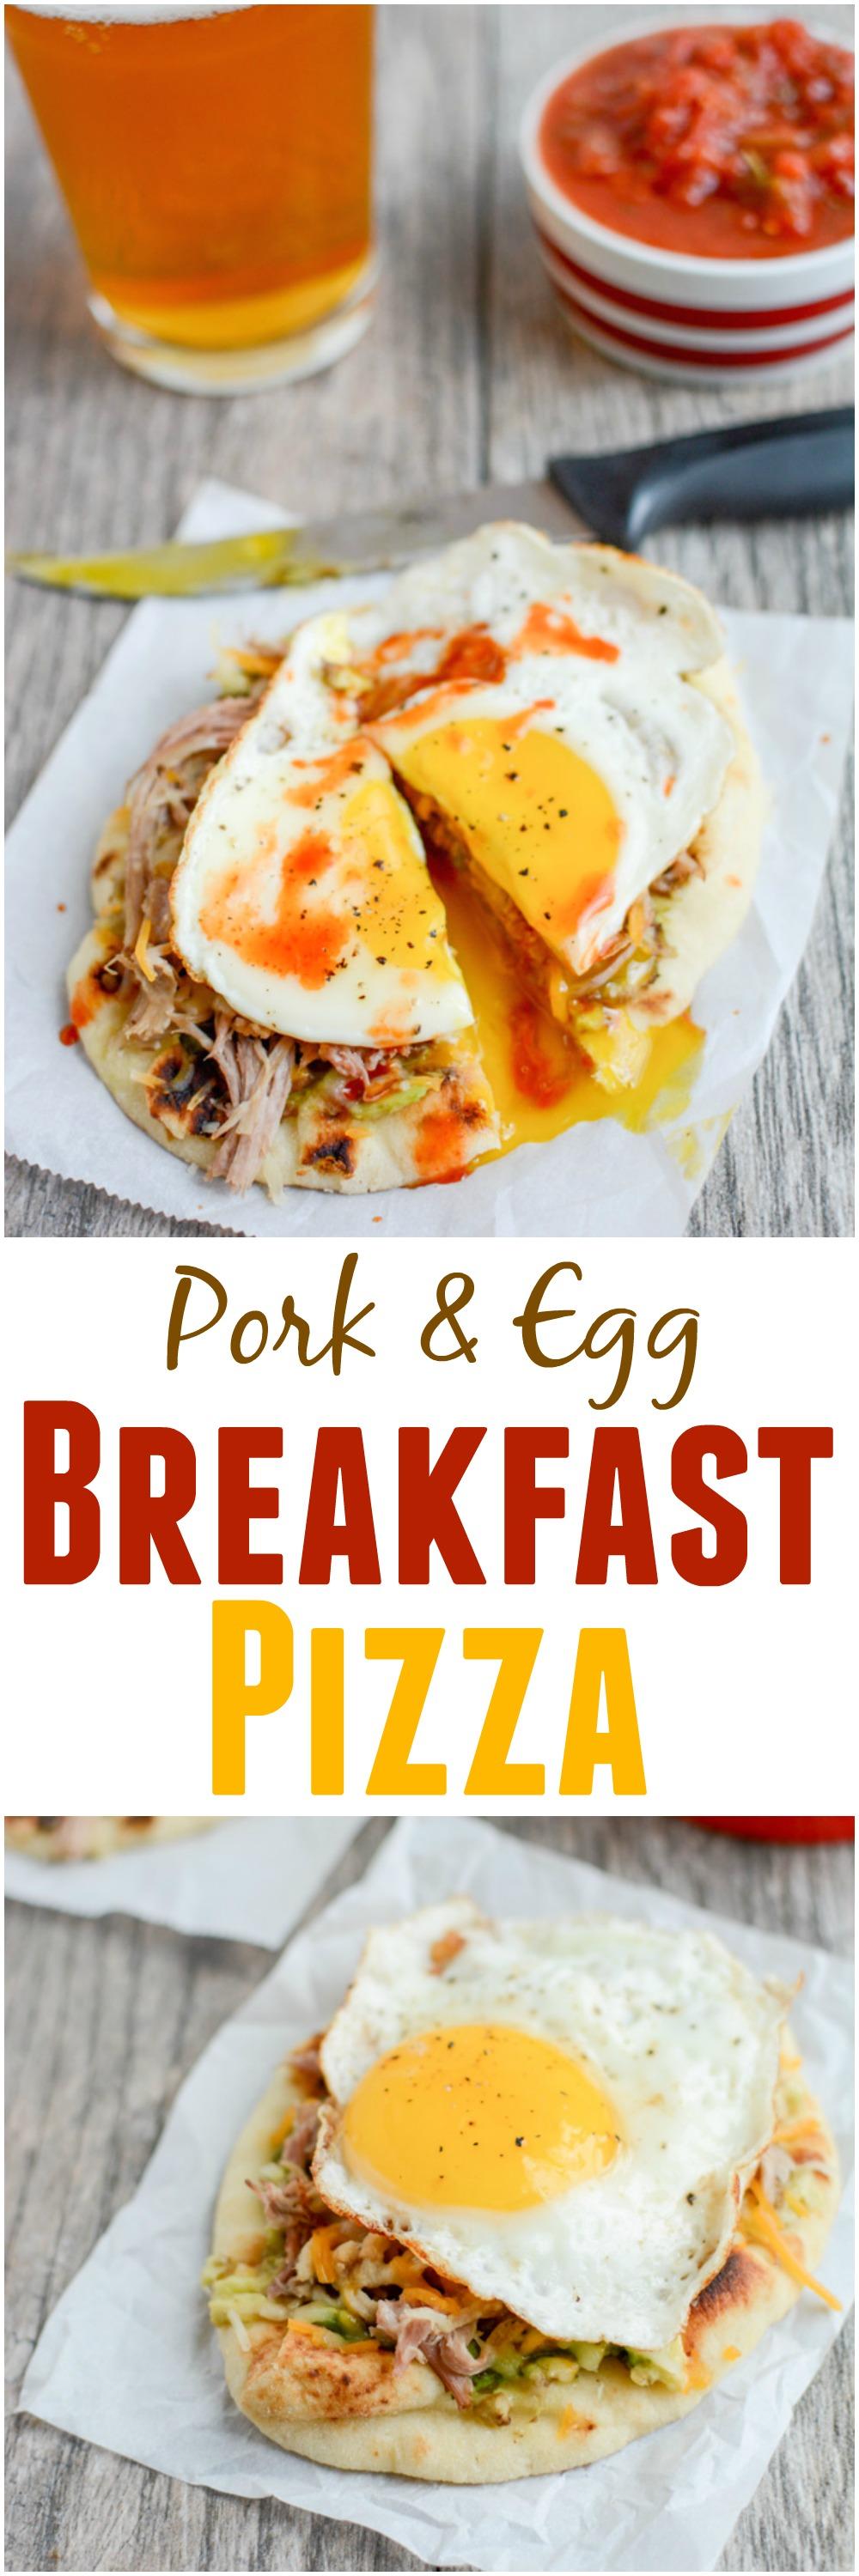 This Pork and Egg Breakfast Pizza is perfect for a late morning football party or tailgating. Cook the pork overnight, then just shred, assemble and top with an egg!